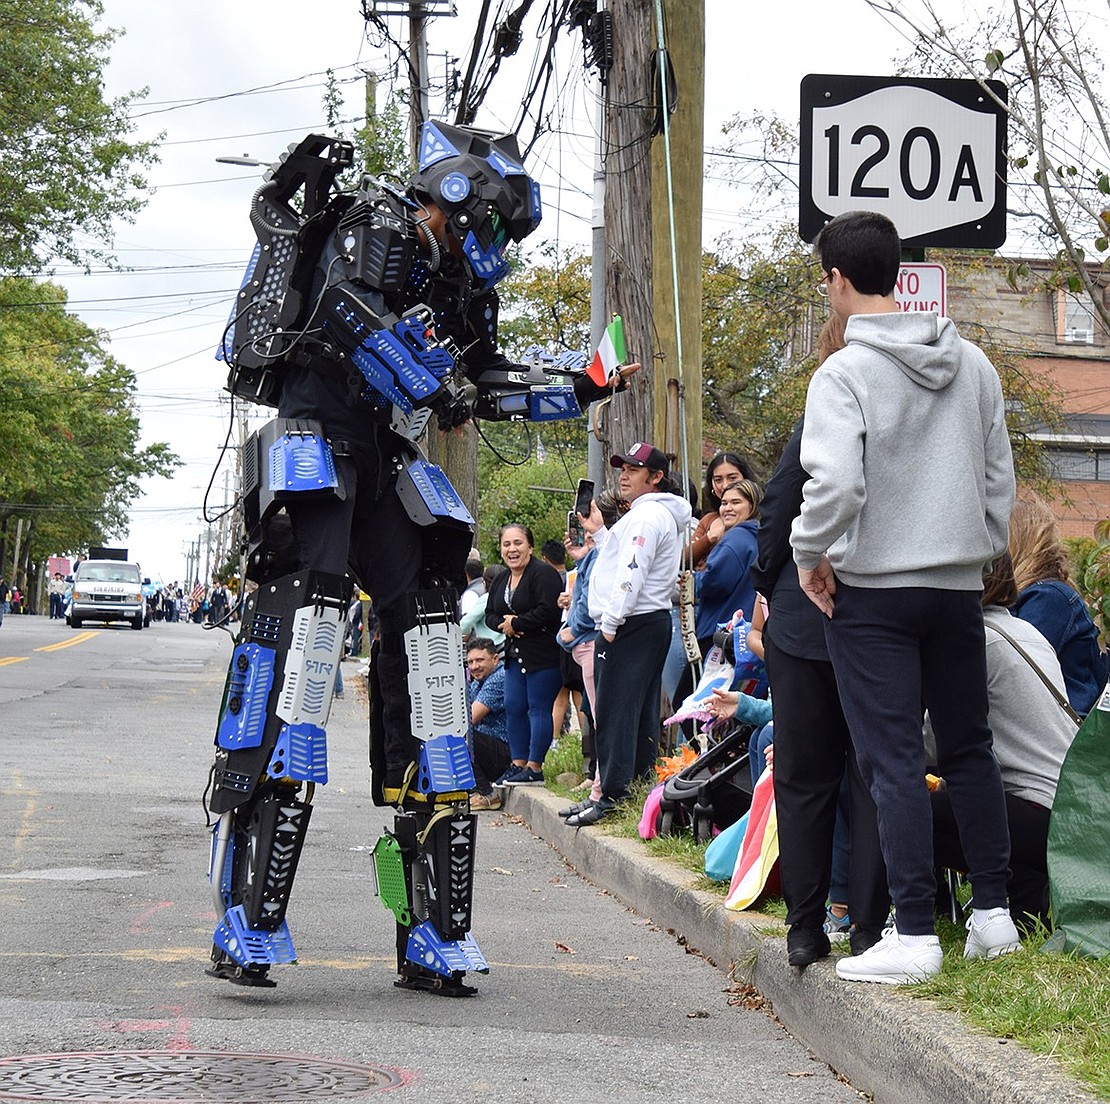 With tiny Italian flags in hand, a dancing robot entertains parade spectators as they strut down Westchester Avenue.